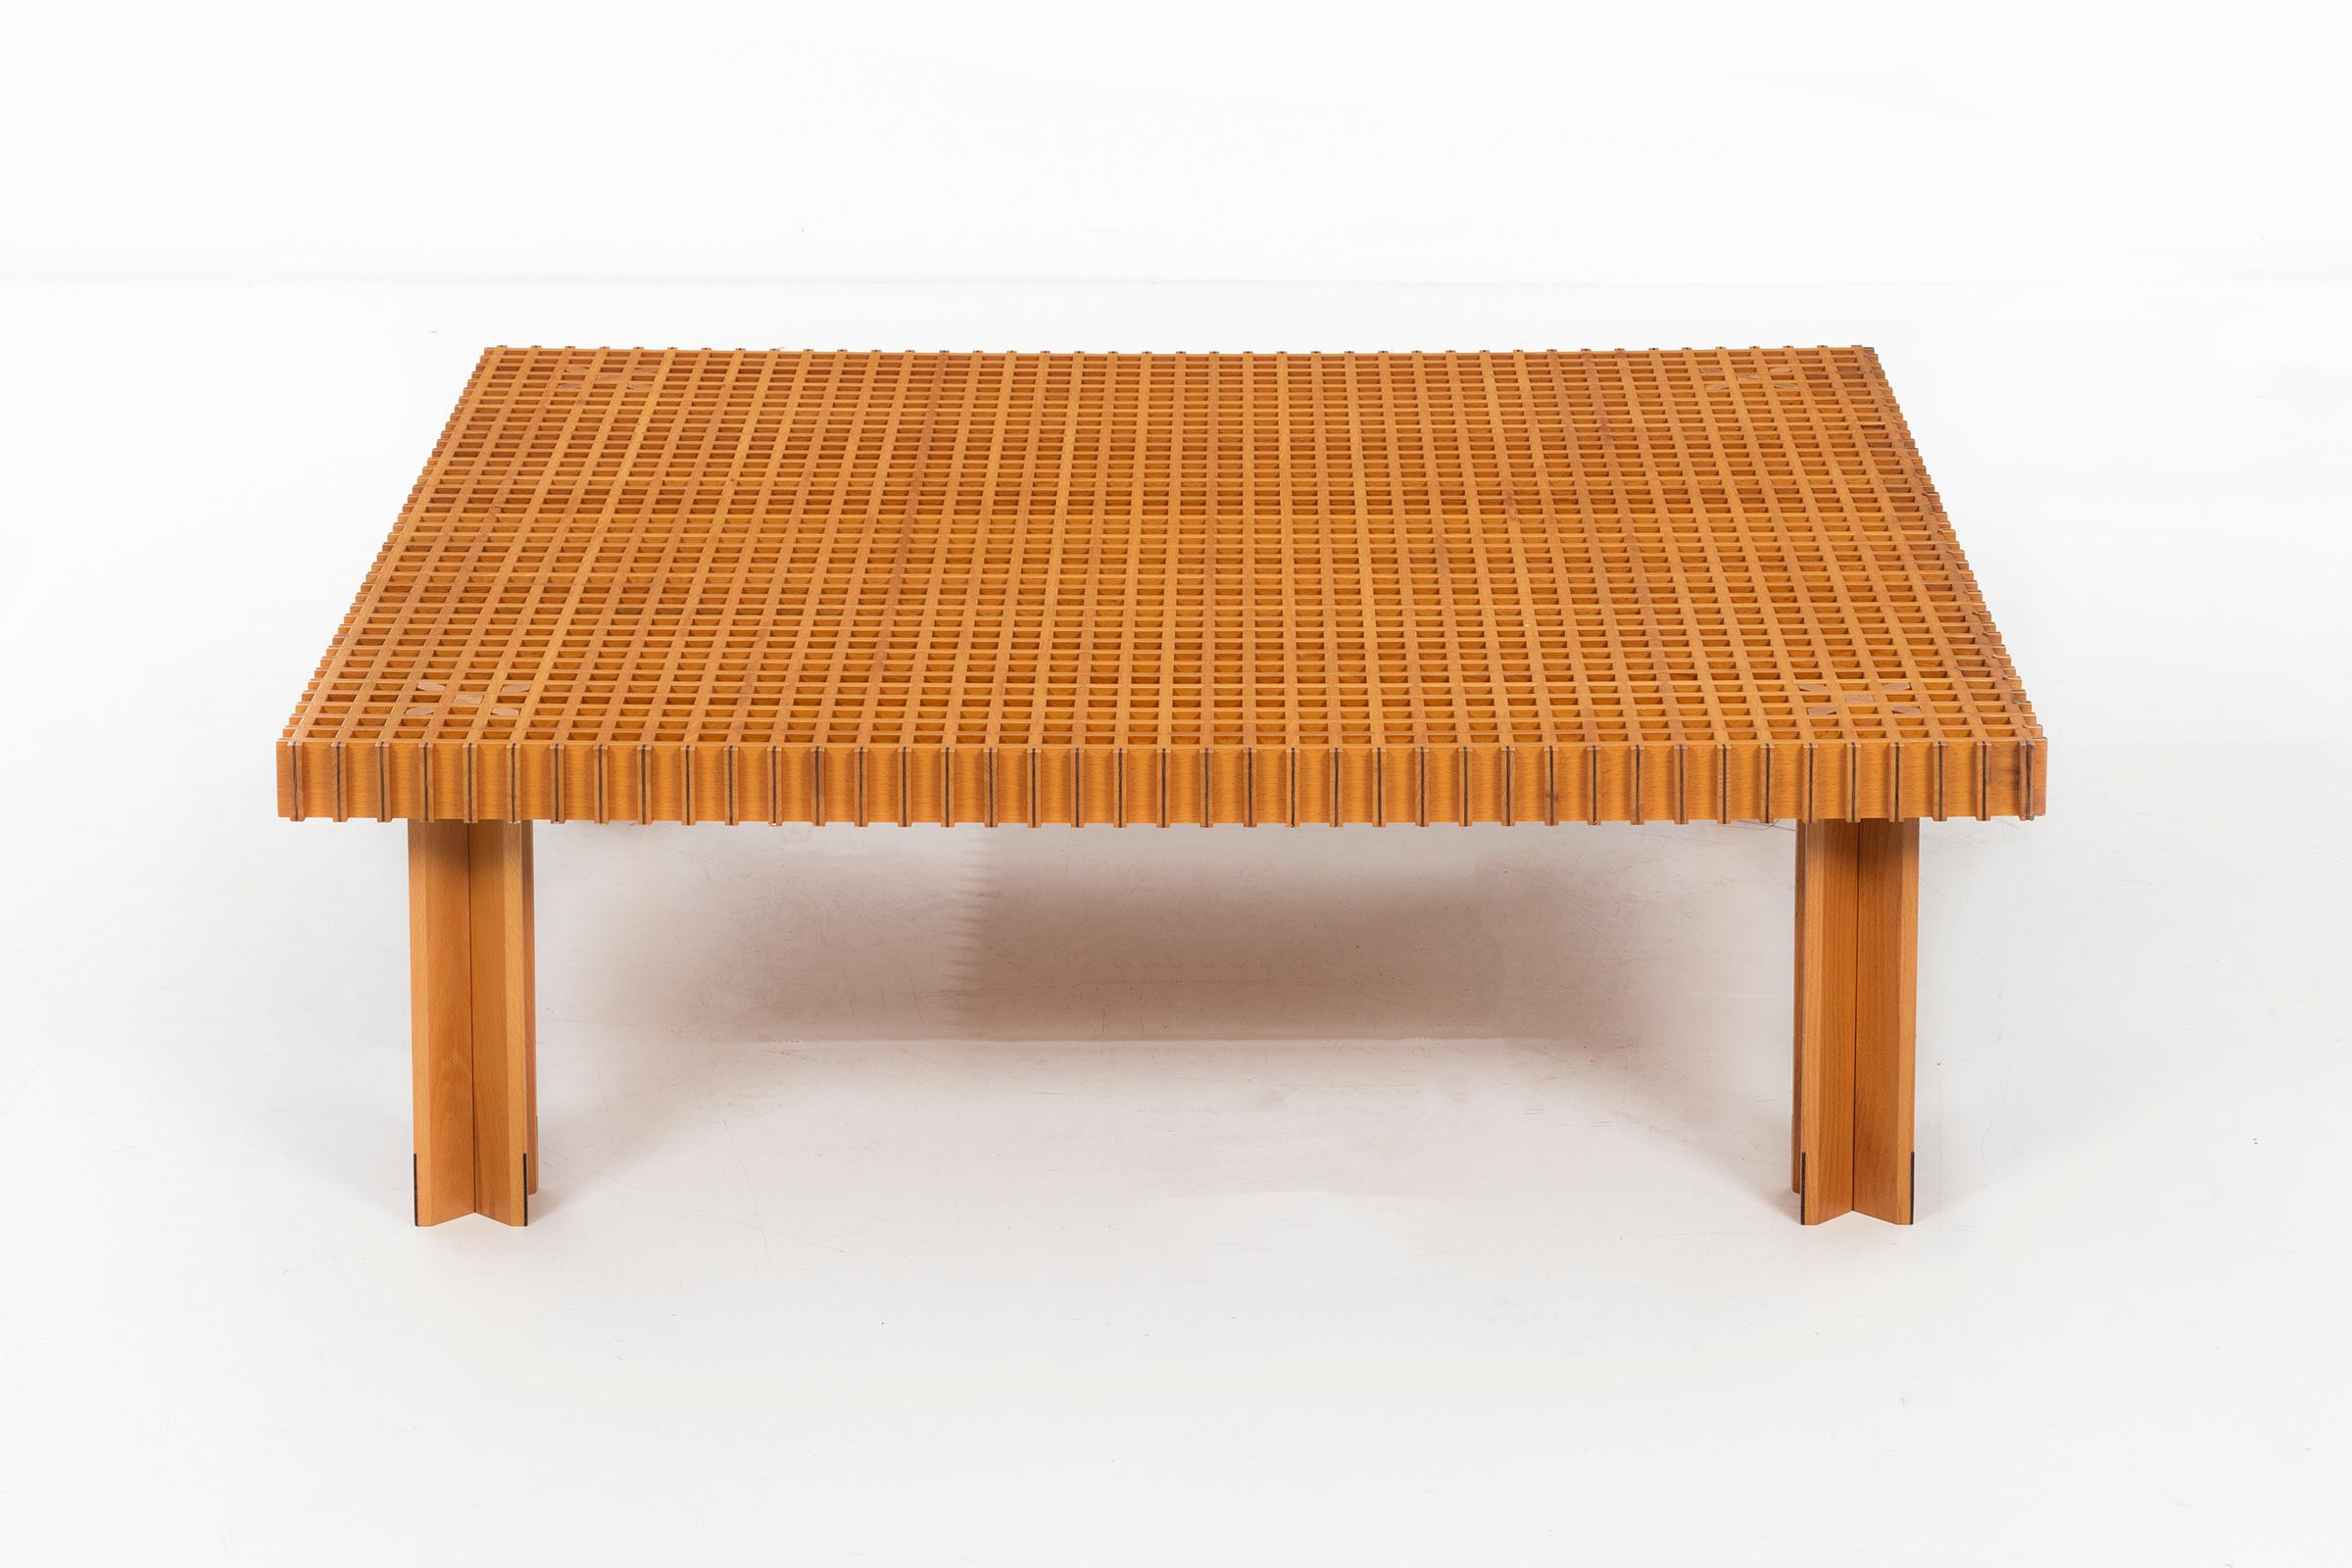 Frattini for Ghianda of Italy distributed by Knoll, Kyoto coffee table, made of beech and ebony woods, comprised of 1,705 joints and 1,600 holes, the table is made from slats of wood joined at 45-degree angles. Coined 